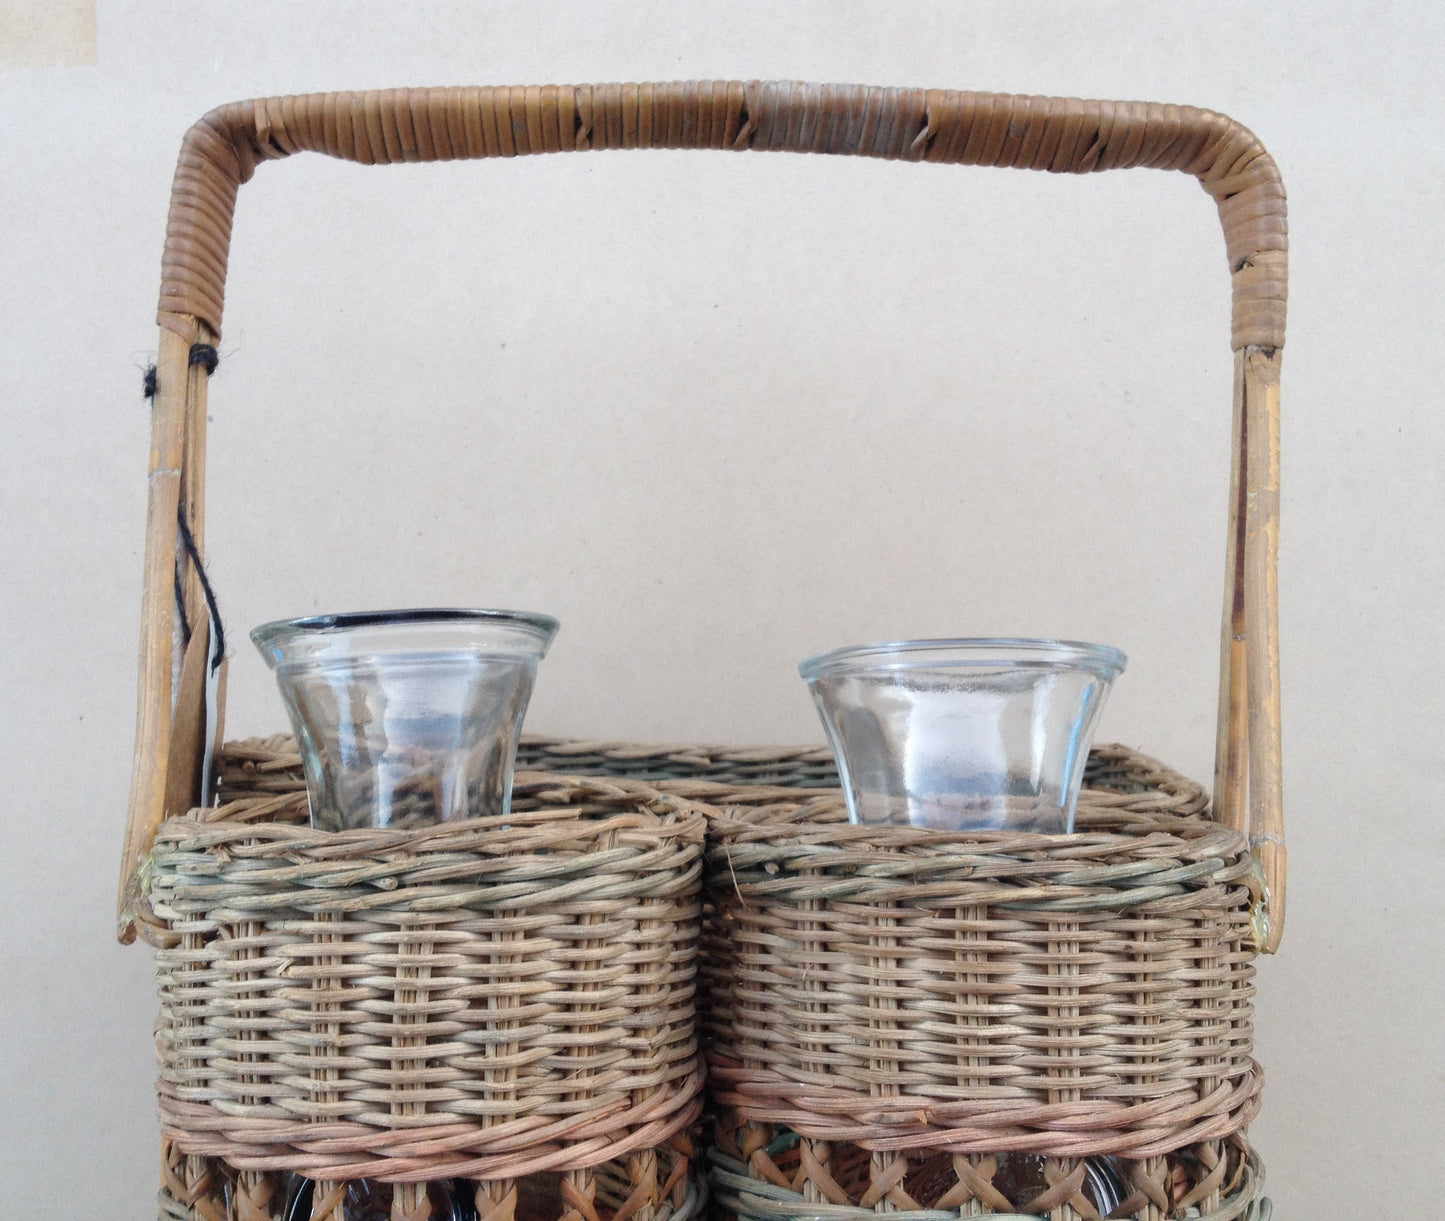 Rattan Picnic Basket with Glass Caraffes